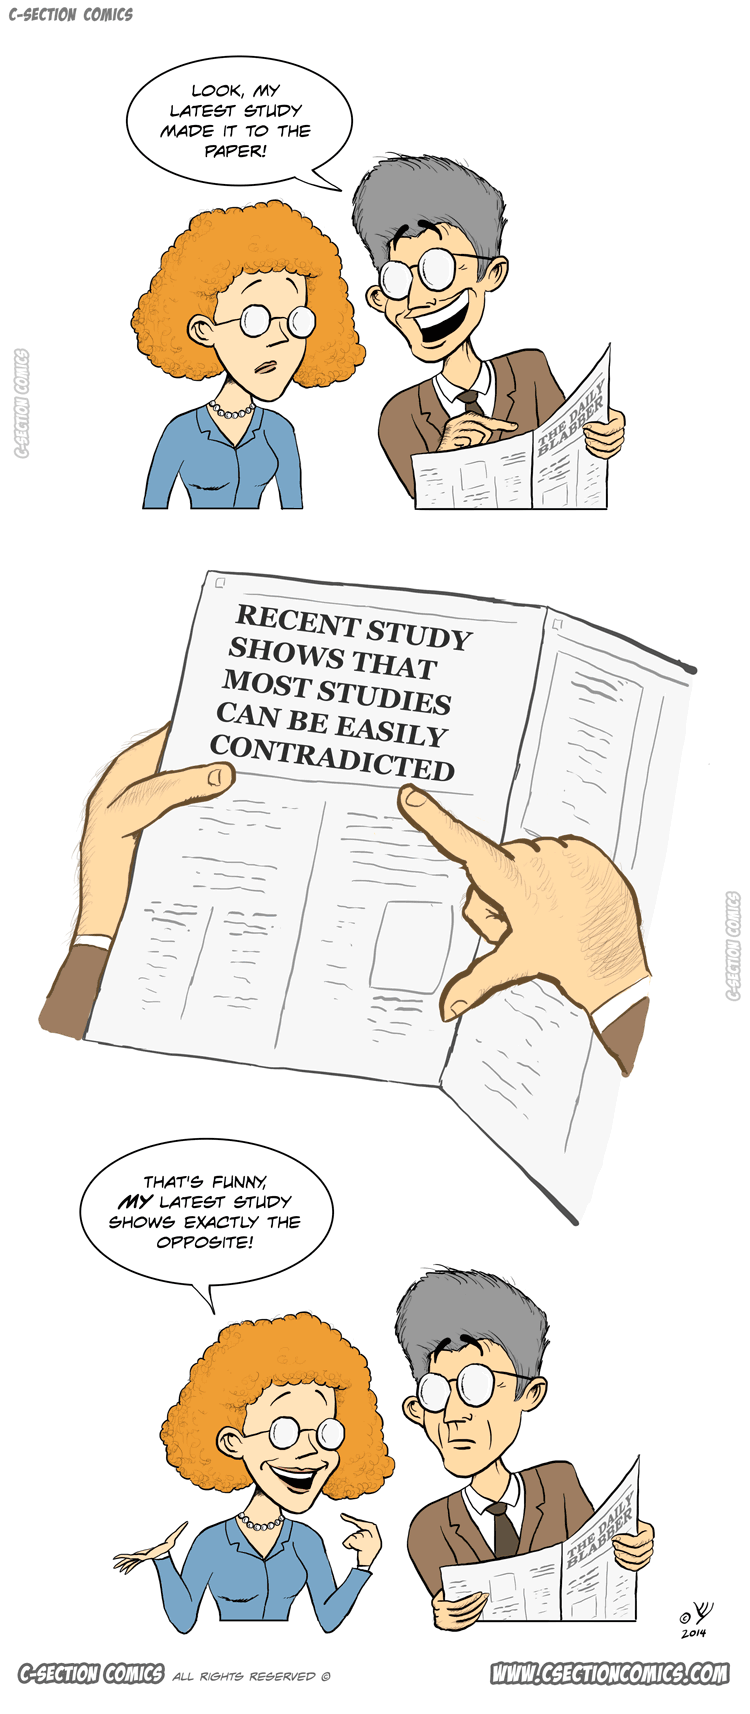 This Latest Study Will Knock You off Your Feet - cartoon by C-Section Comics